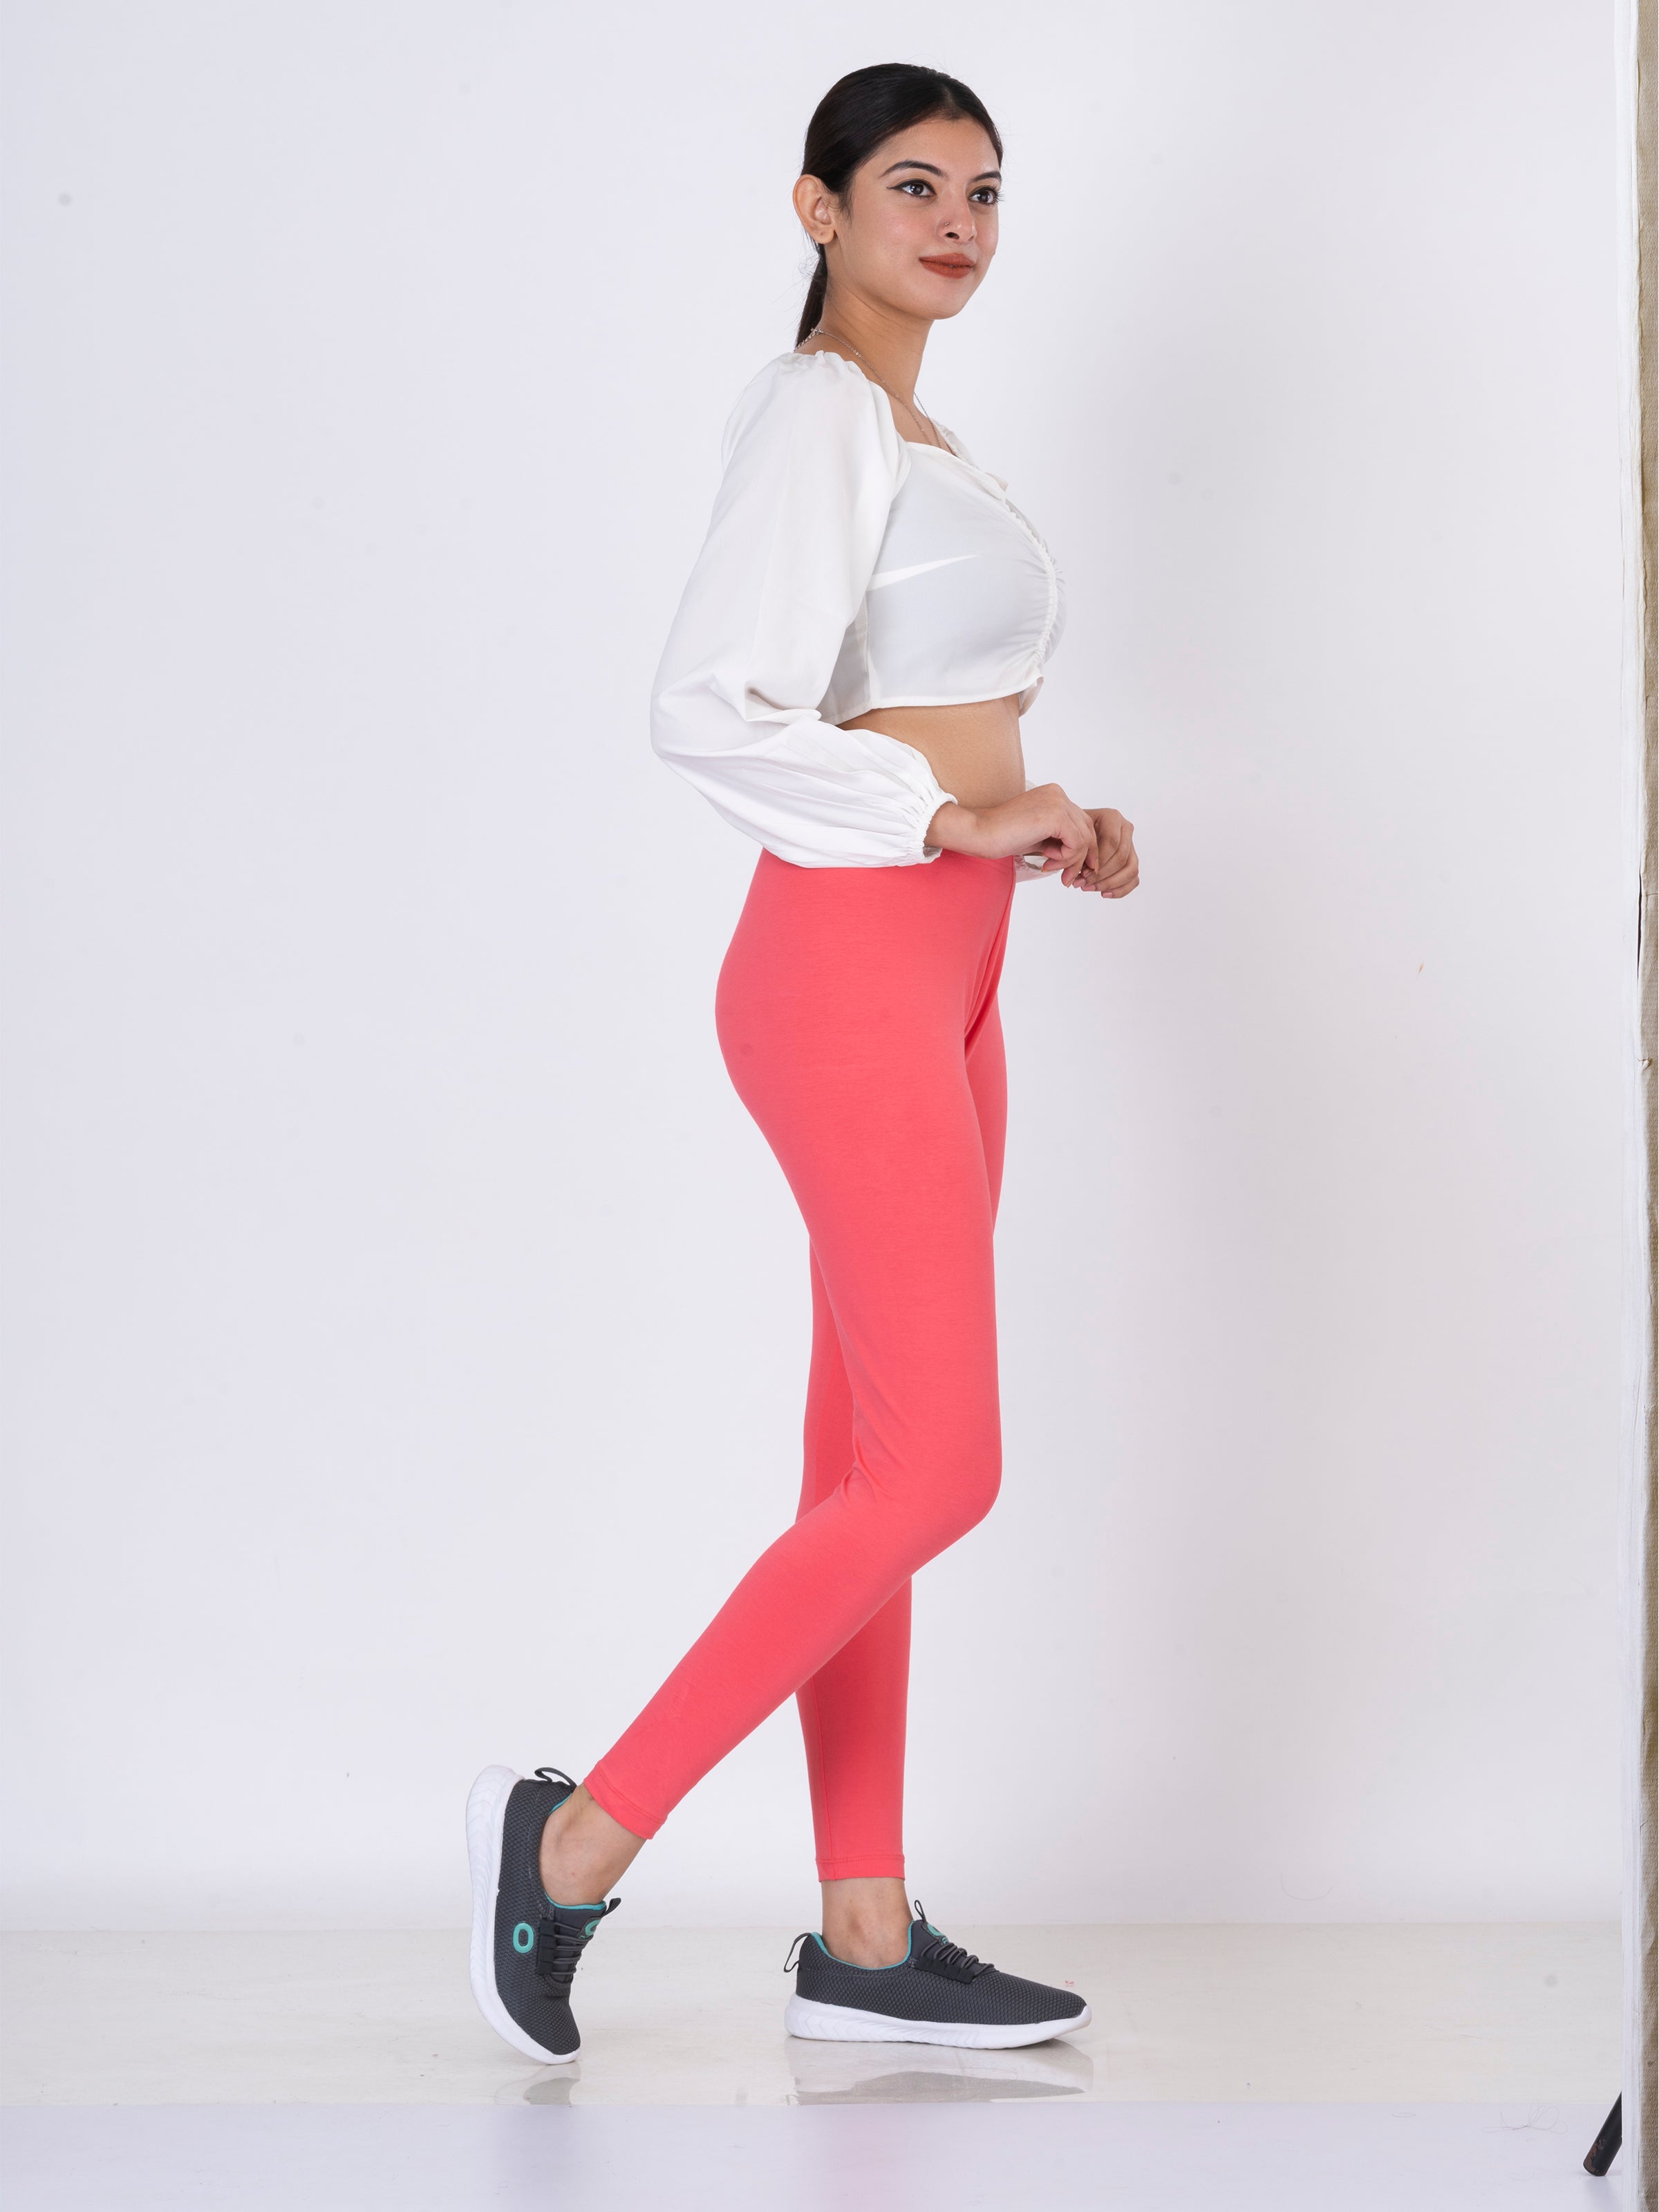 LUX LYRA Slim Fit Women White Trousers - Buy LUX LYRA Slim Fit Women White  Trousers Online at Best Prices in India | Flipkart.com